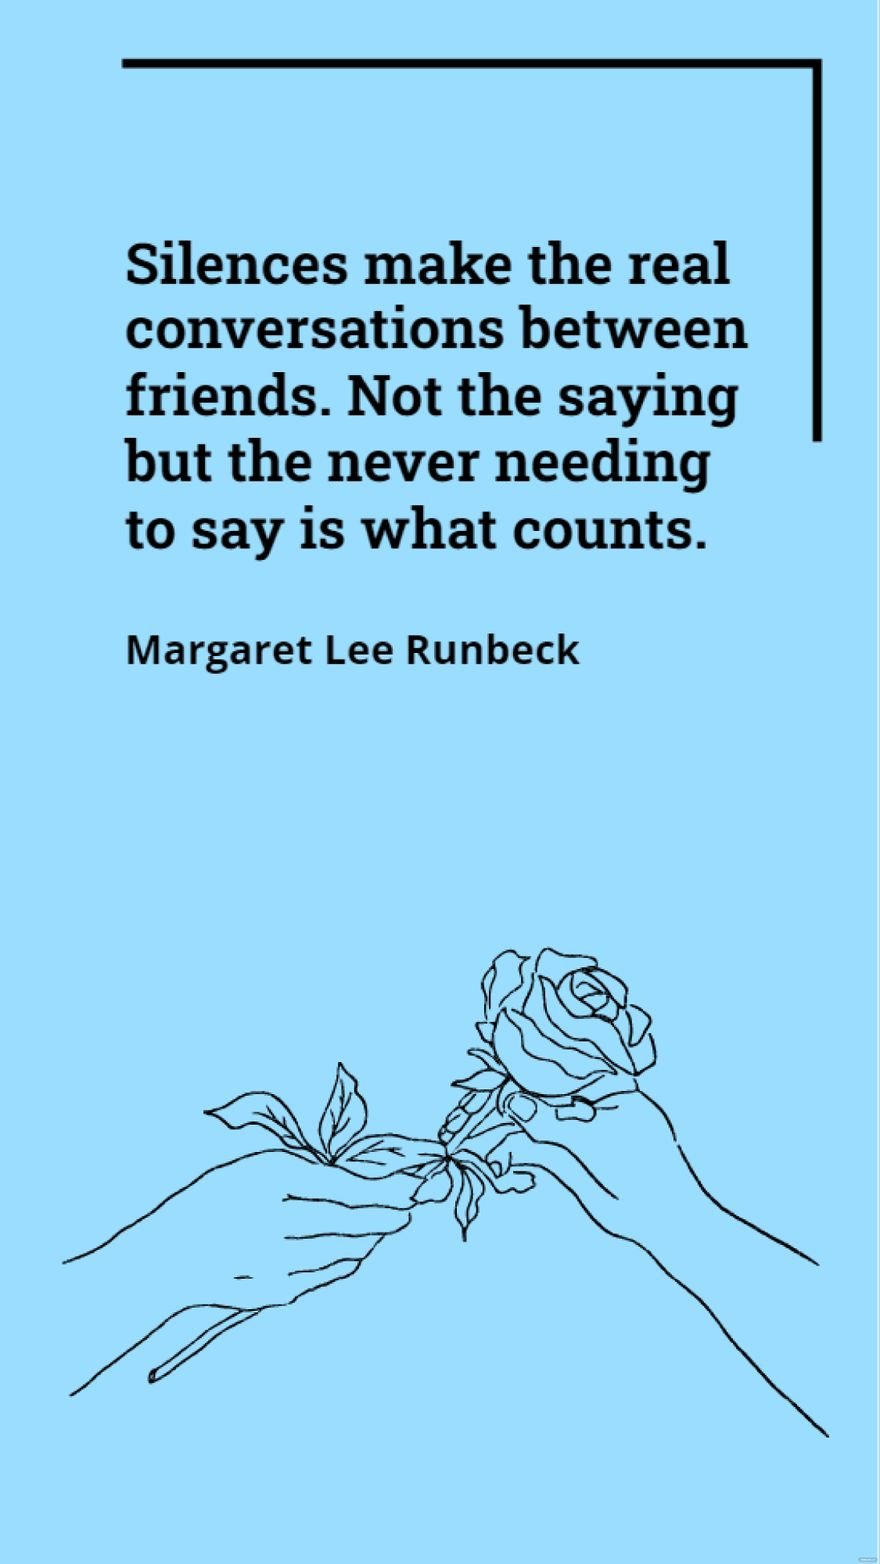 Free Margaret Lee Runbeck - Silences make the real conversations between friends. Not the saying but the never needing to say is what counts. in JPG